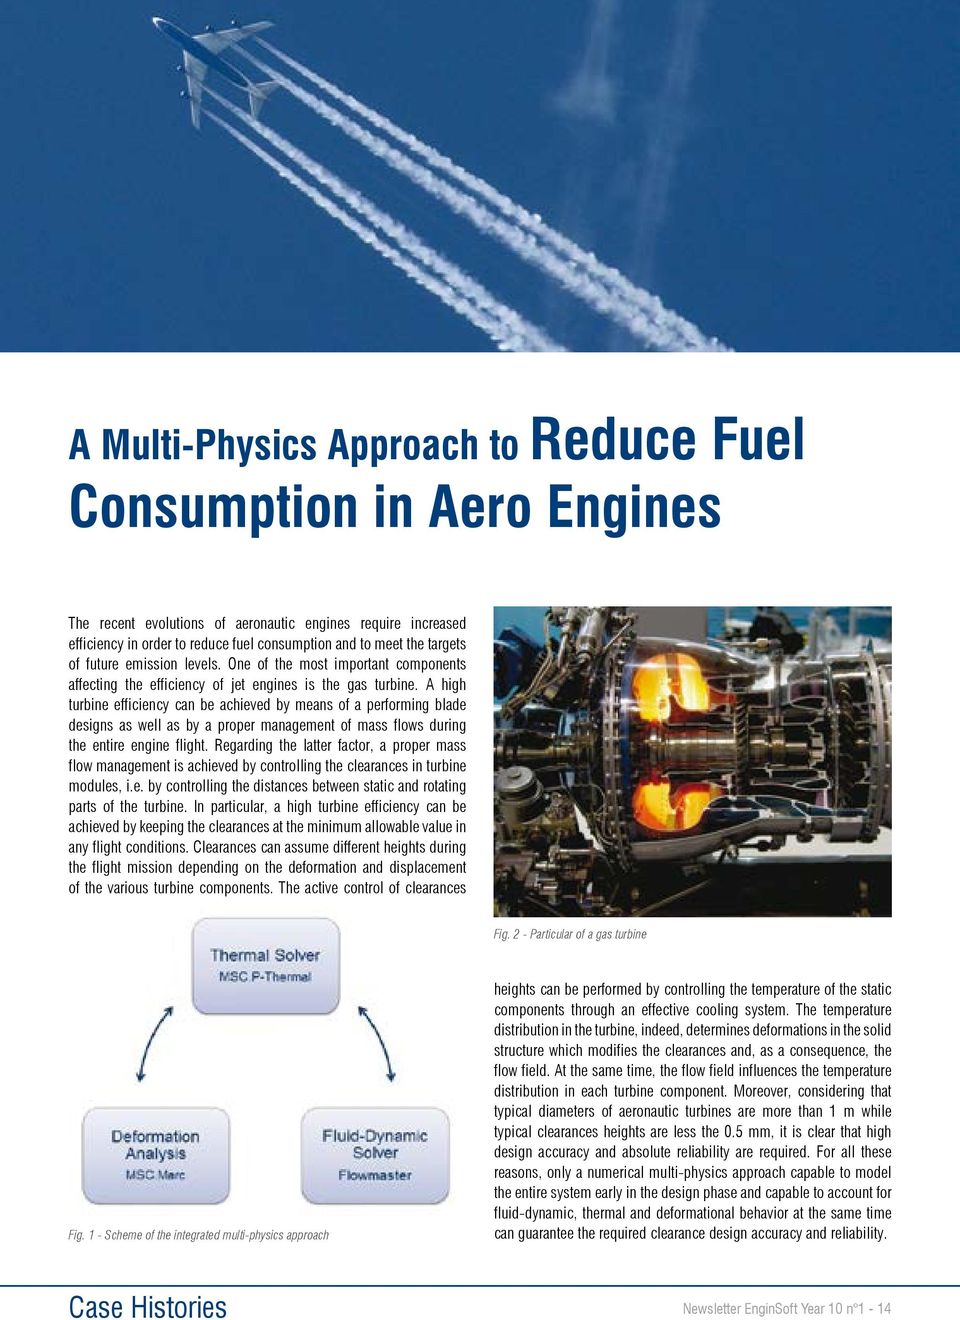 A high turbine efficiency can be achieved by means of a performing blade designs as well as by a proper management of mass flows during the entire engine flight.